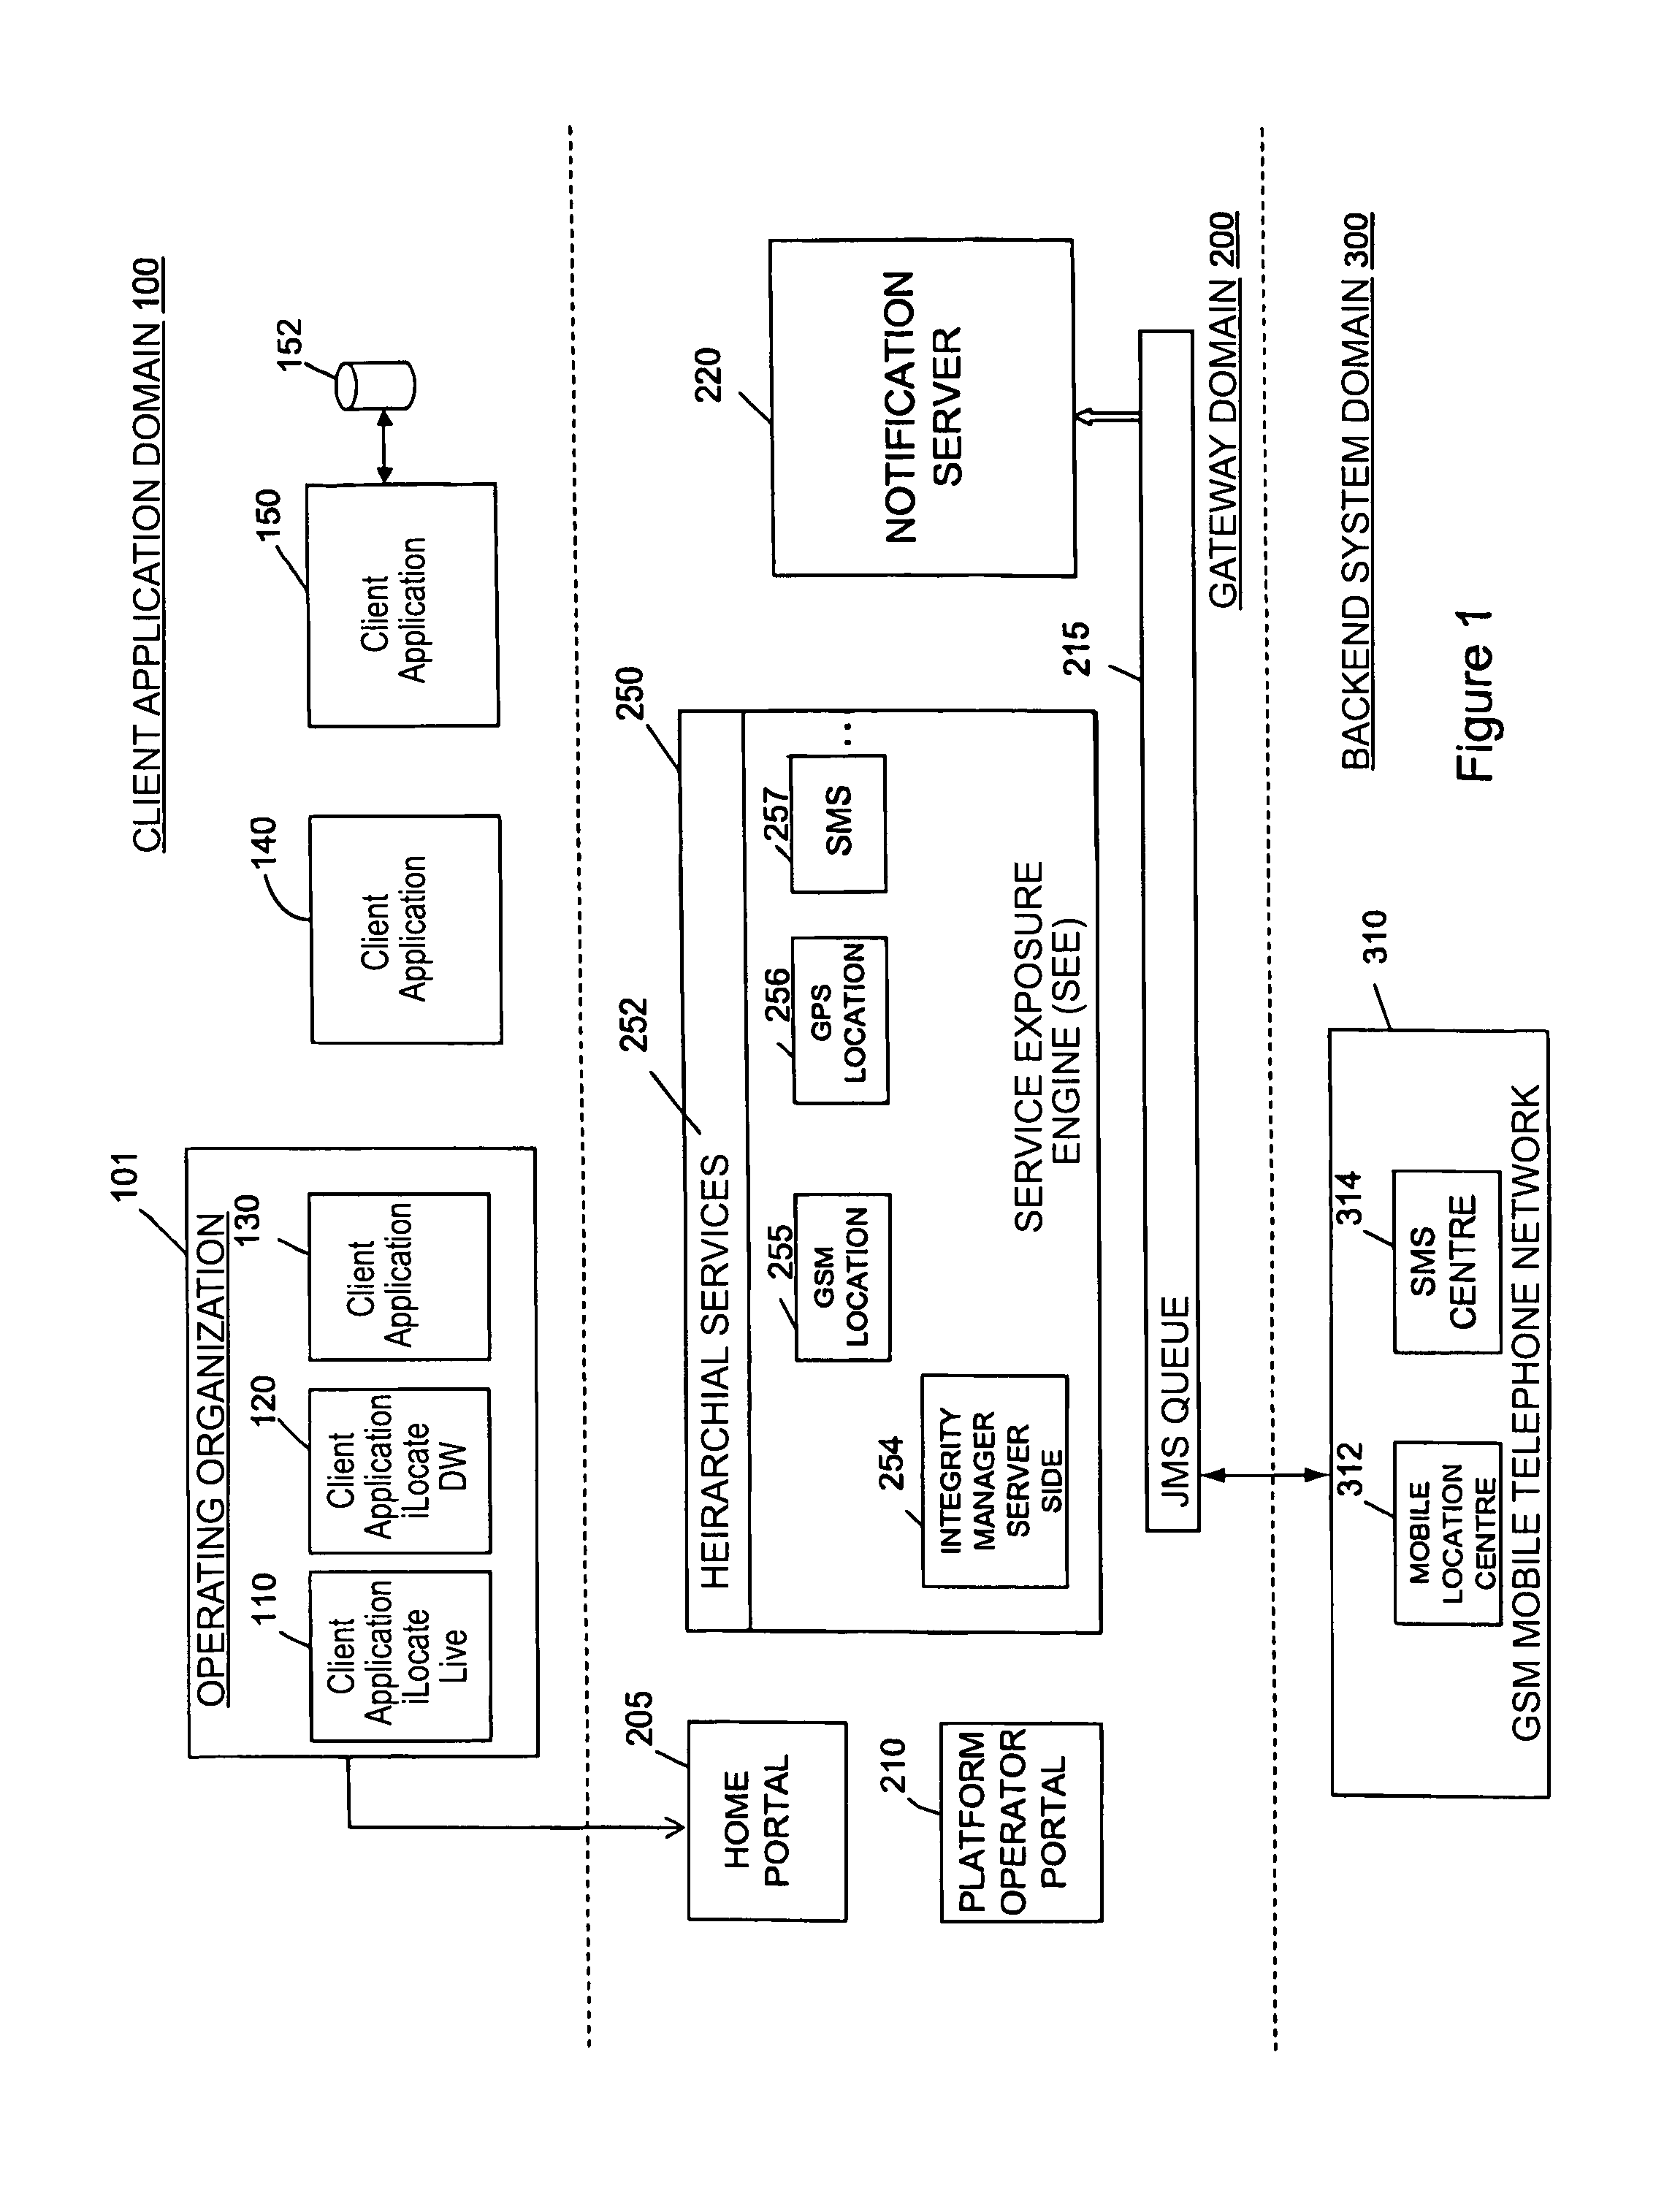 Method and apparatus for communicating data between computer devices